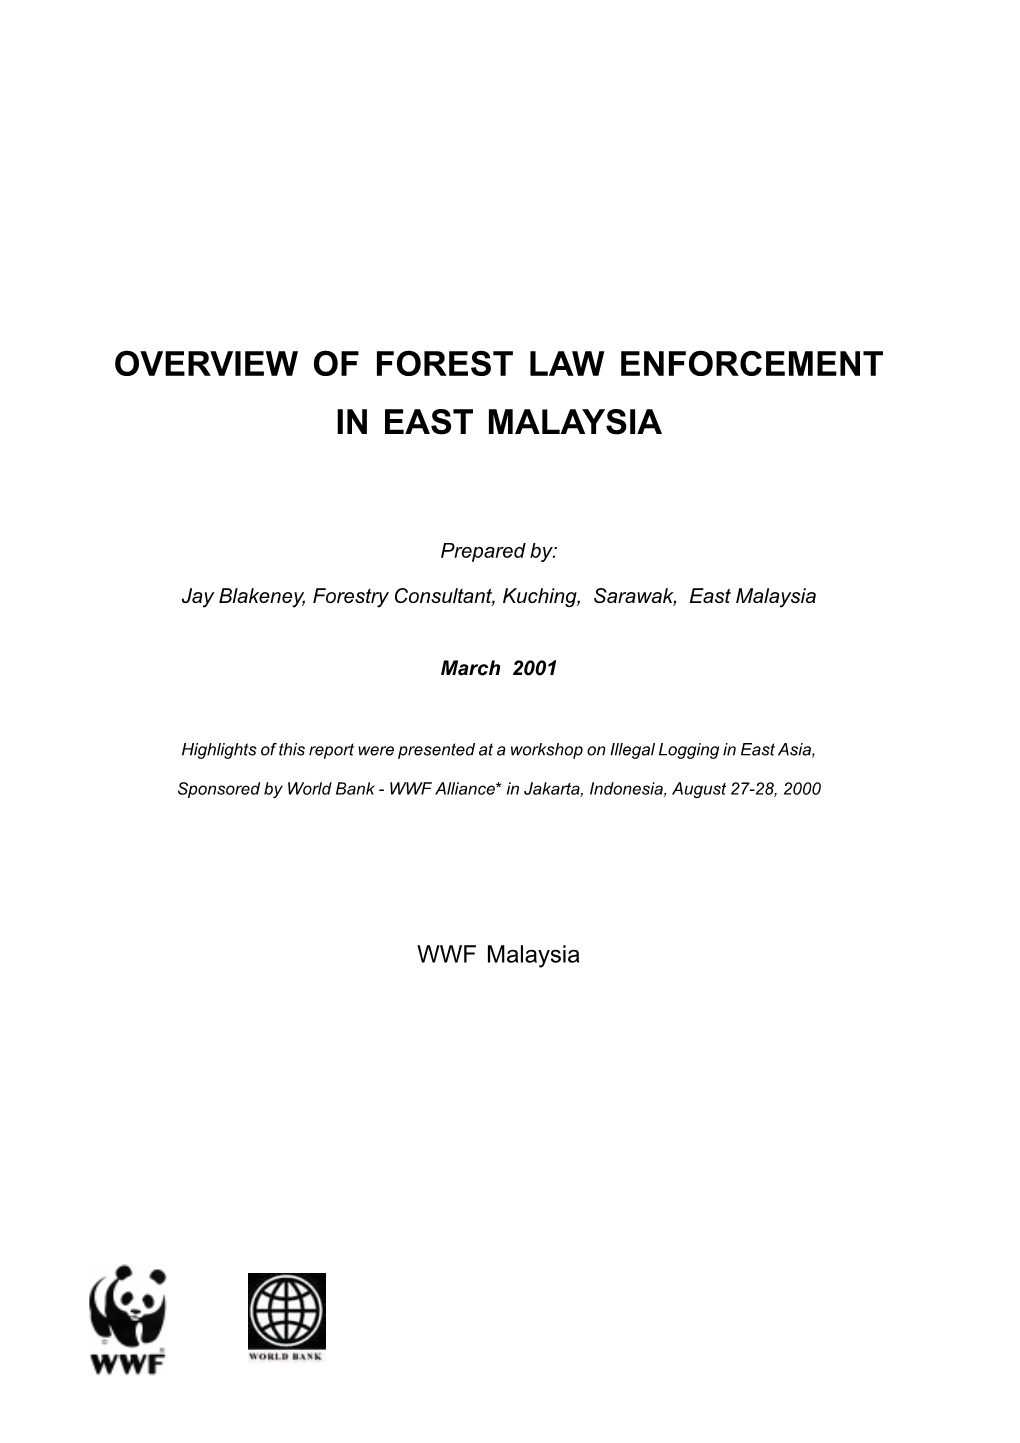 Overview of Forest Law Enforcement in East Malaysia